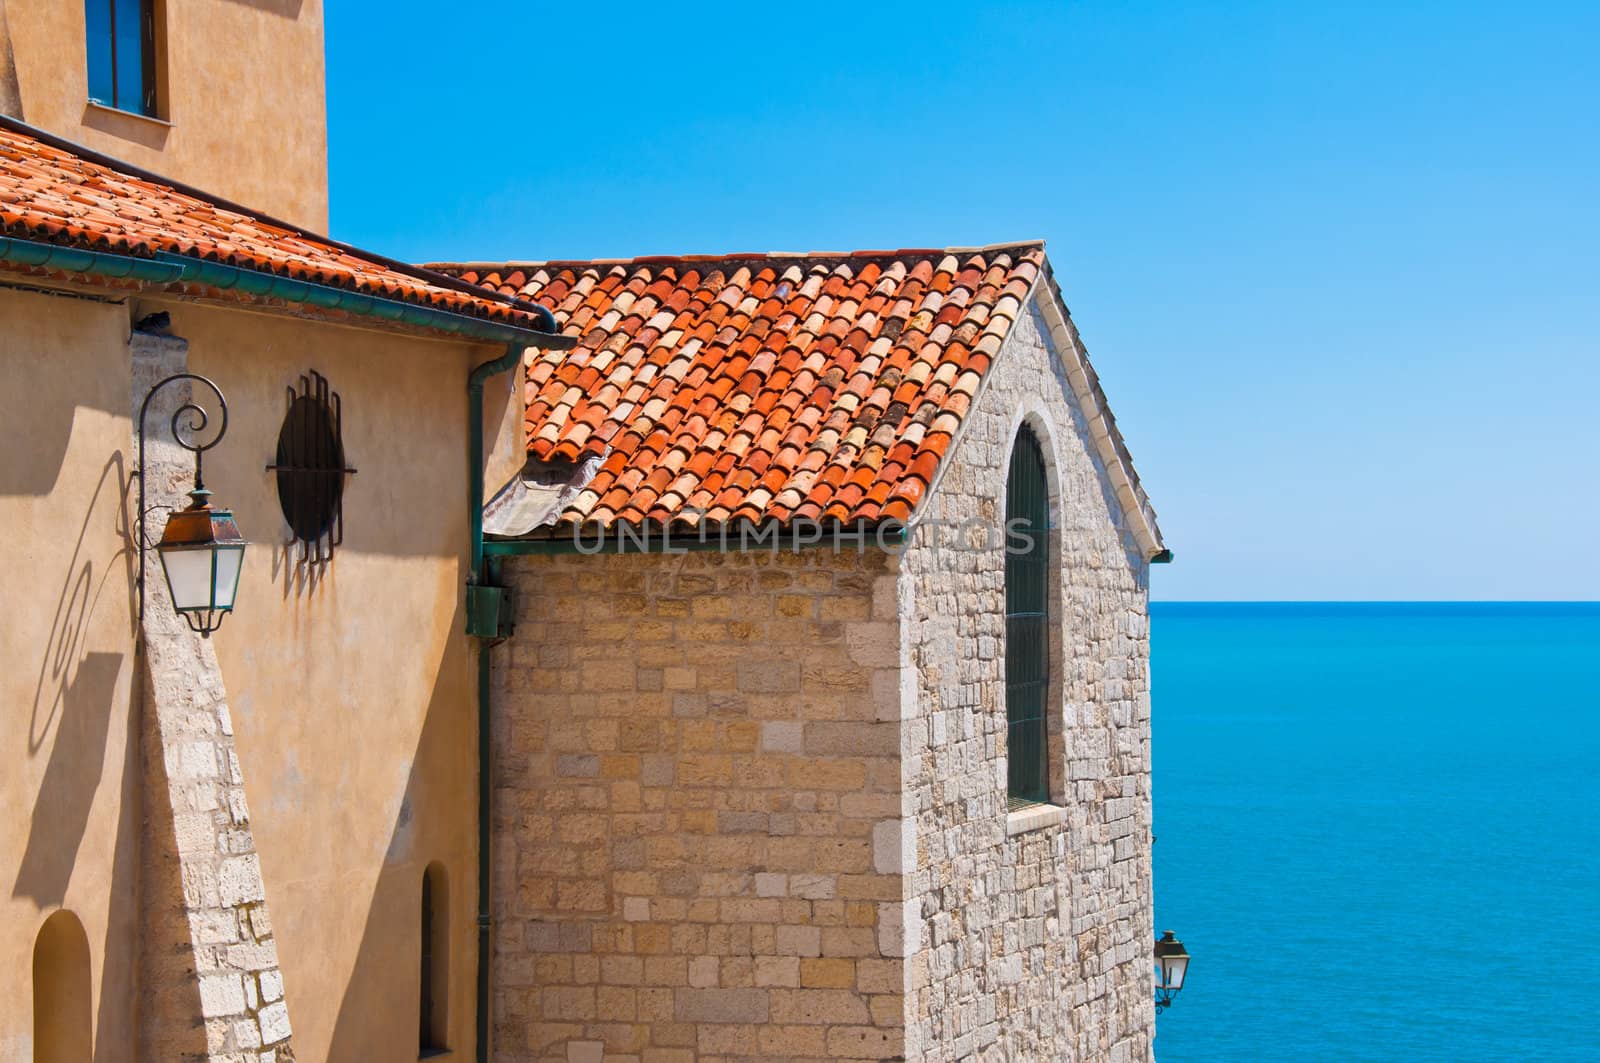 Historical building detail and ocean view with blue sky